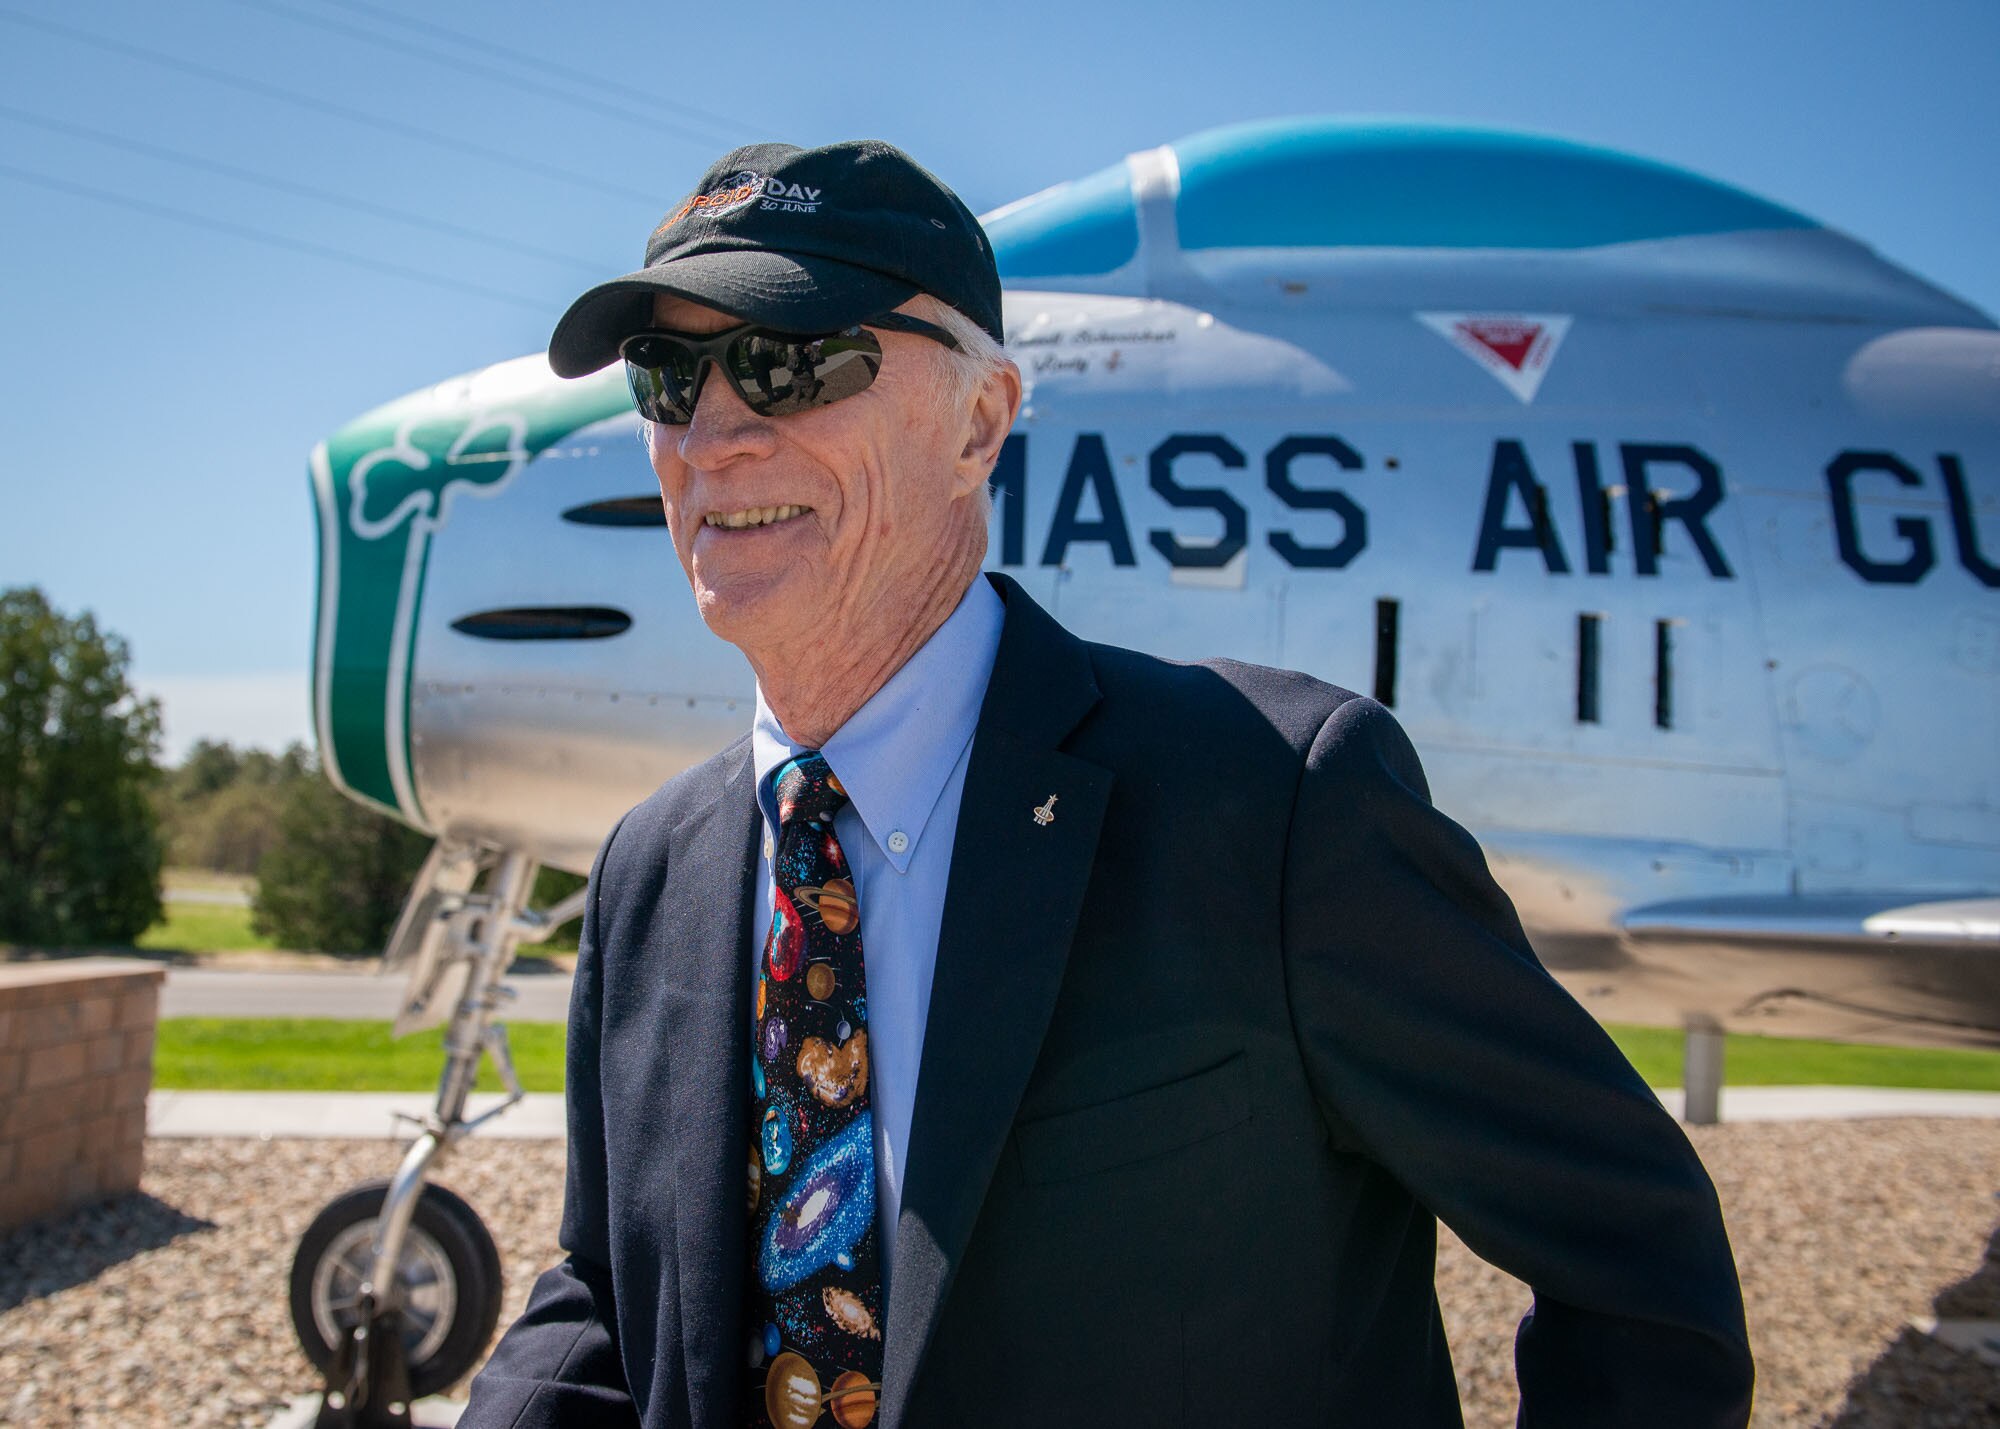 A North American F-86H Sabre static display was dedicated during a ceremony at Otis Air National Guard Base, Mass. on June 8. The ceremony was held to formally announce the dedication of tail number 31235 in honor of Captain Russell “Rusty” L. Schweickart, who was in attendance. Schweickart flew the F-86H Sabre during the early 1960’s while assigned to the 101st Tactical Fighter Squadron, and later served as lunar module pilot for Apollo 9, March 3-13, 1969.